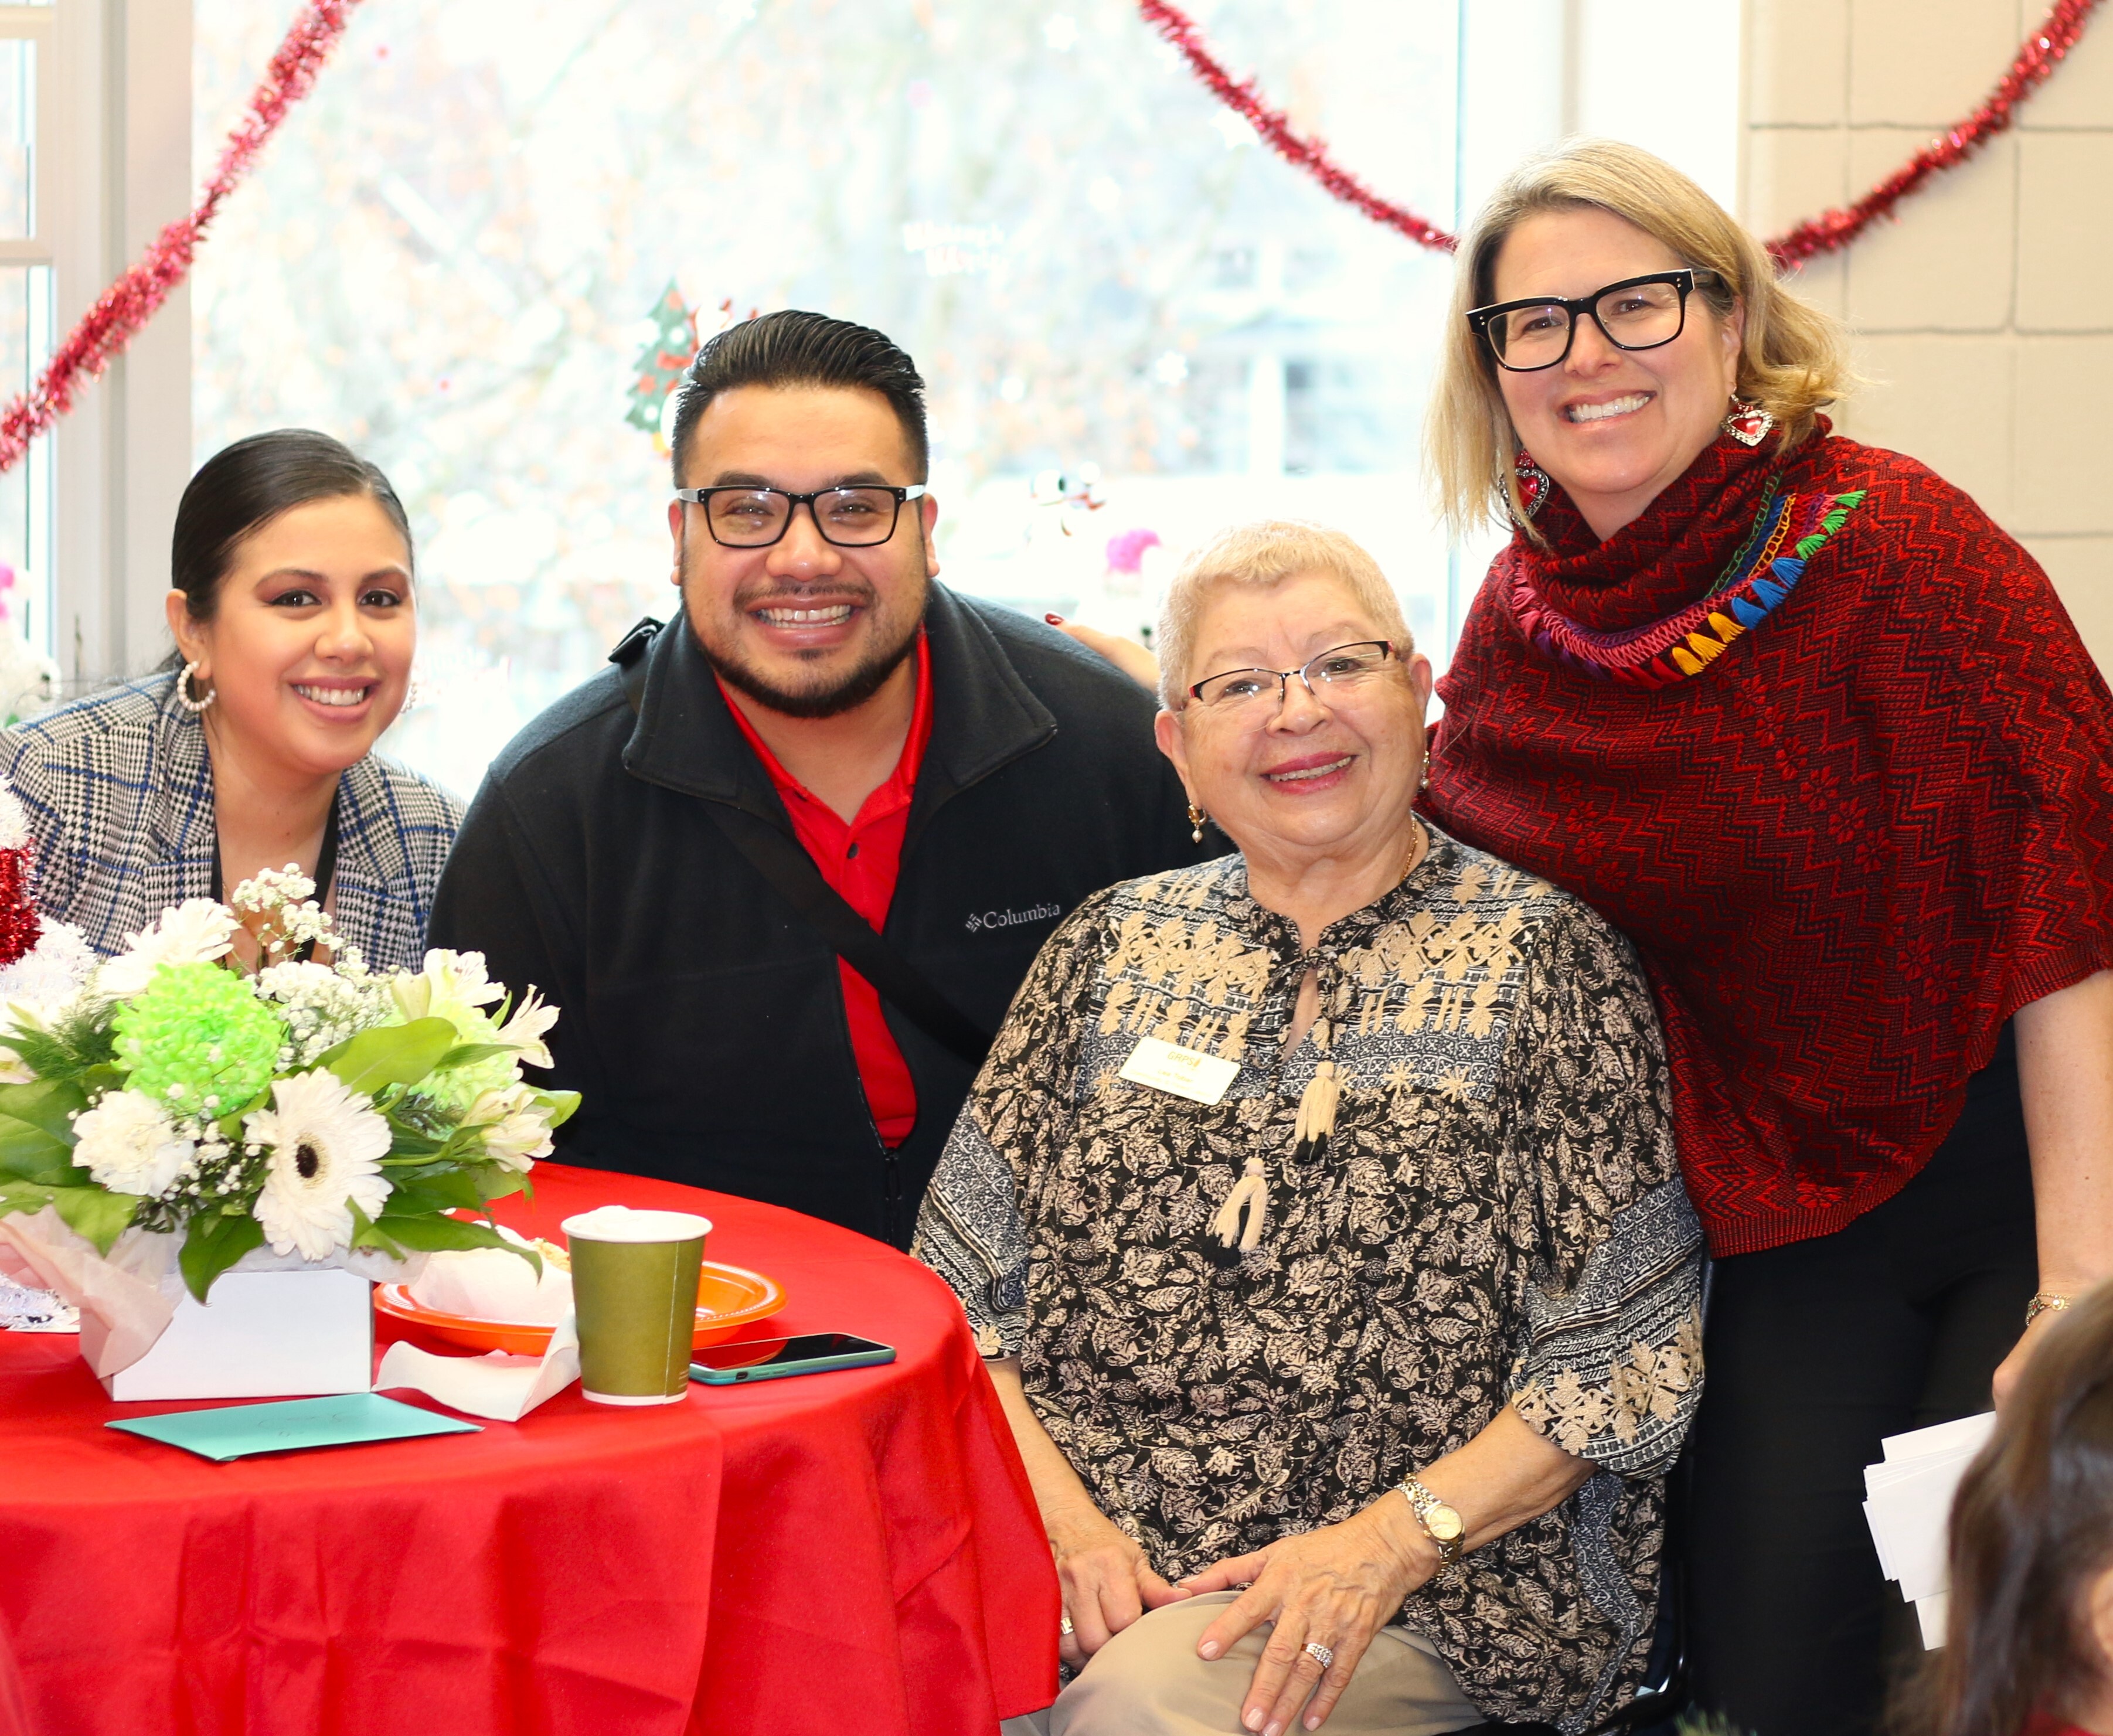 Karrie Roy (far right) with special guests, including (from left) Vanessa Cervantes of Buchanan School (which will host the next Abriendo Puertas sessions), Javier Cervantes, GRPS communications coordinator, and Lea Tobar, a longtime GRPS employee and now an EL Parent Community liaison.